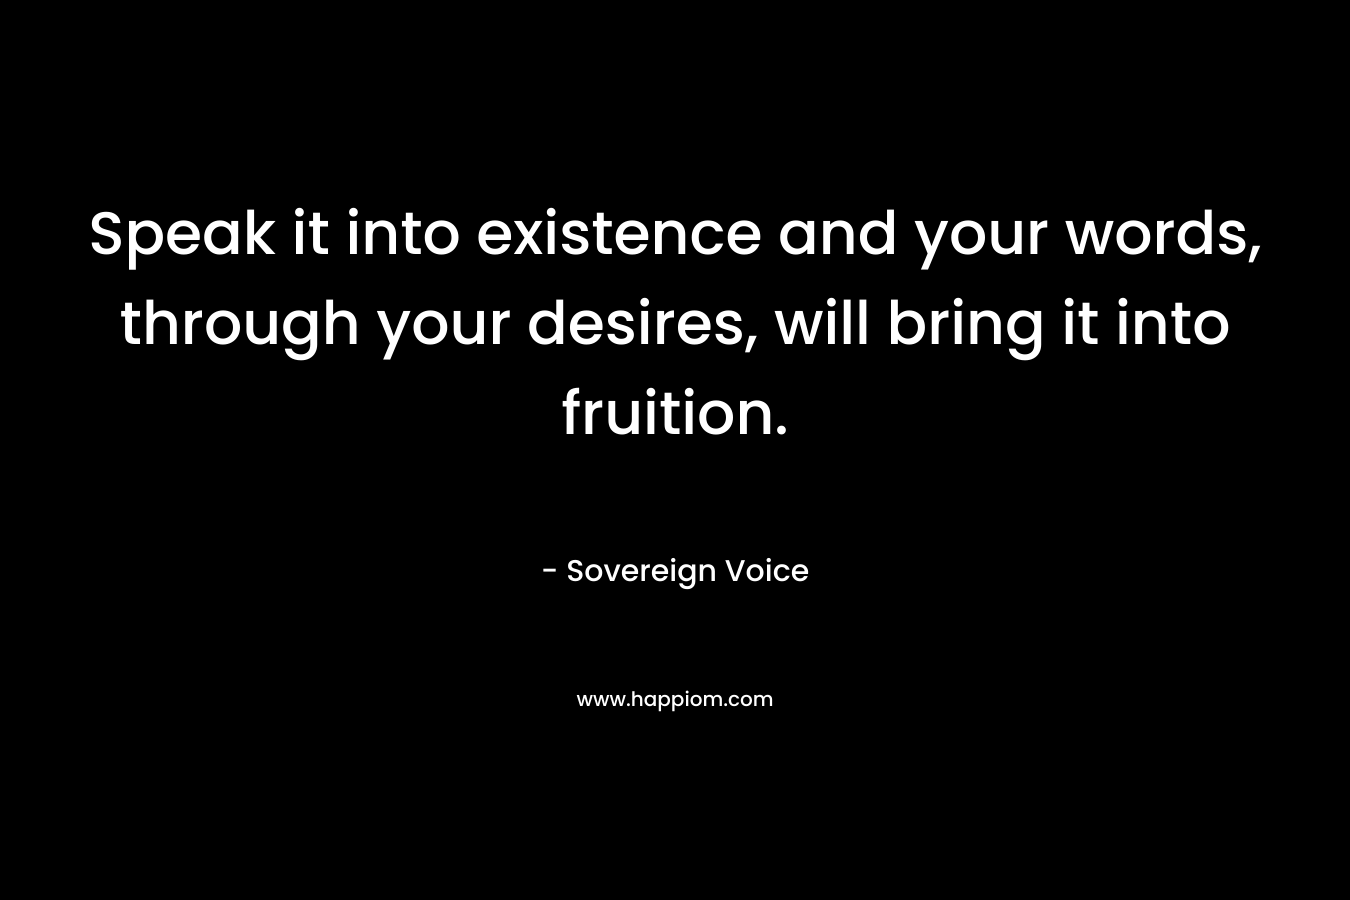 Speak it into existence and your words, through your desires, will bring it into fruition.